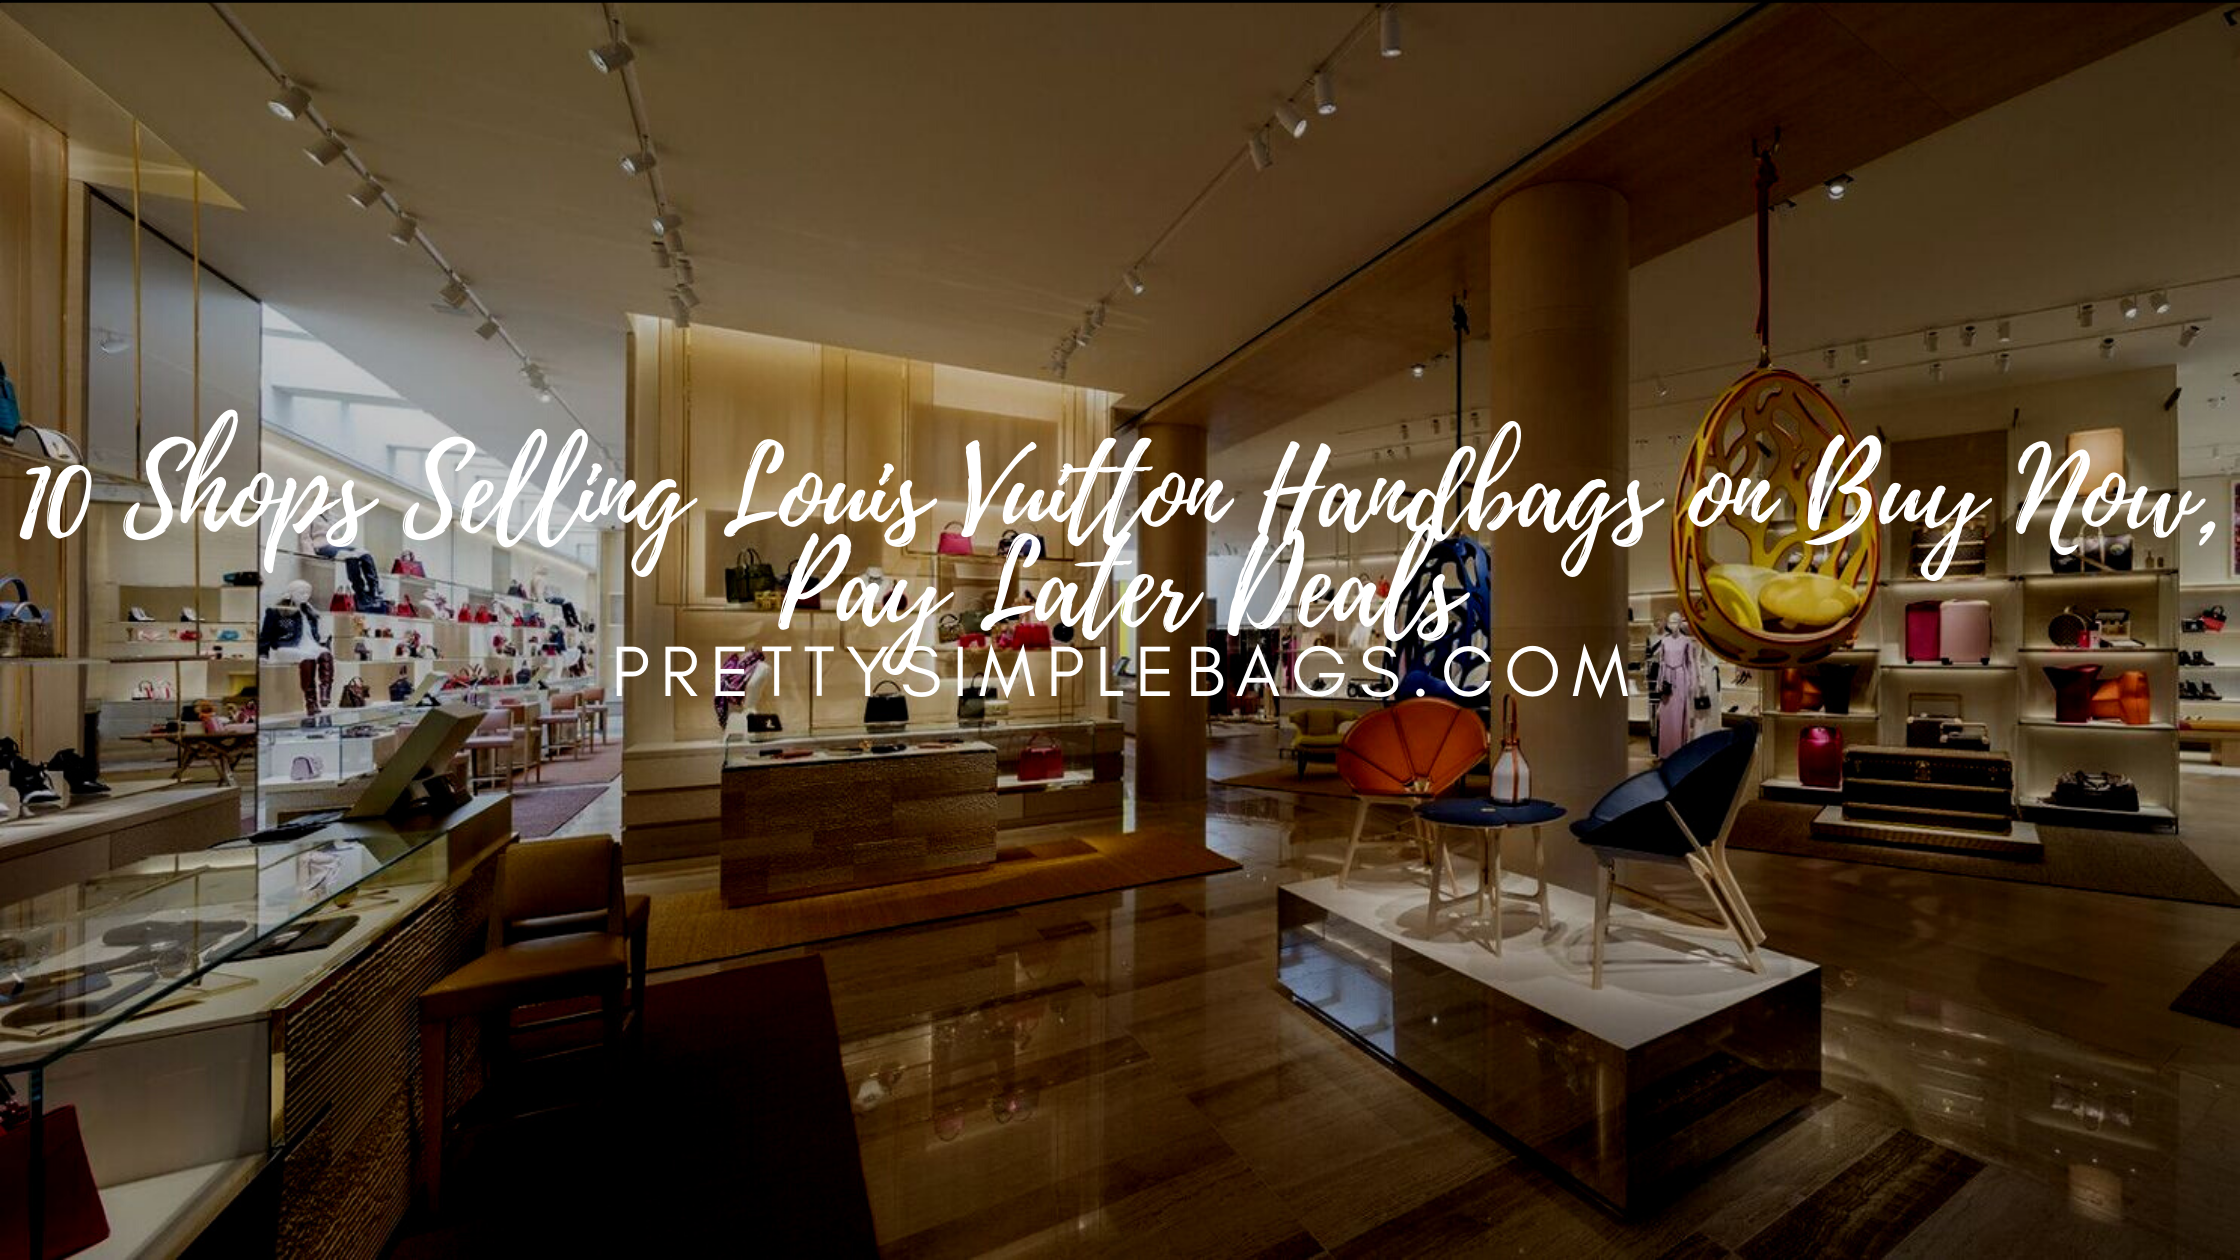 10 Shops Selling Louis Vuitton Handbags on Buy Now, Pay Later Deals -  Pretty Simple Bags